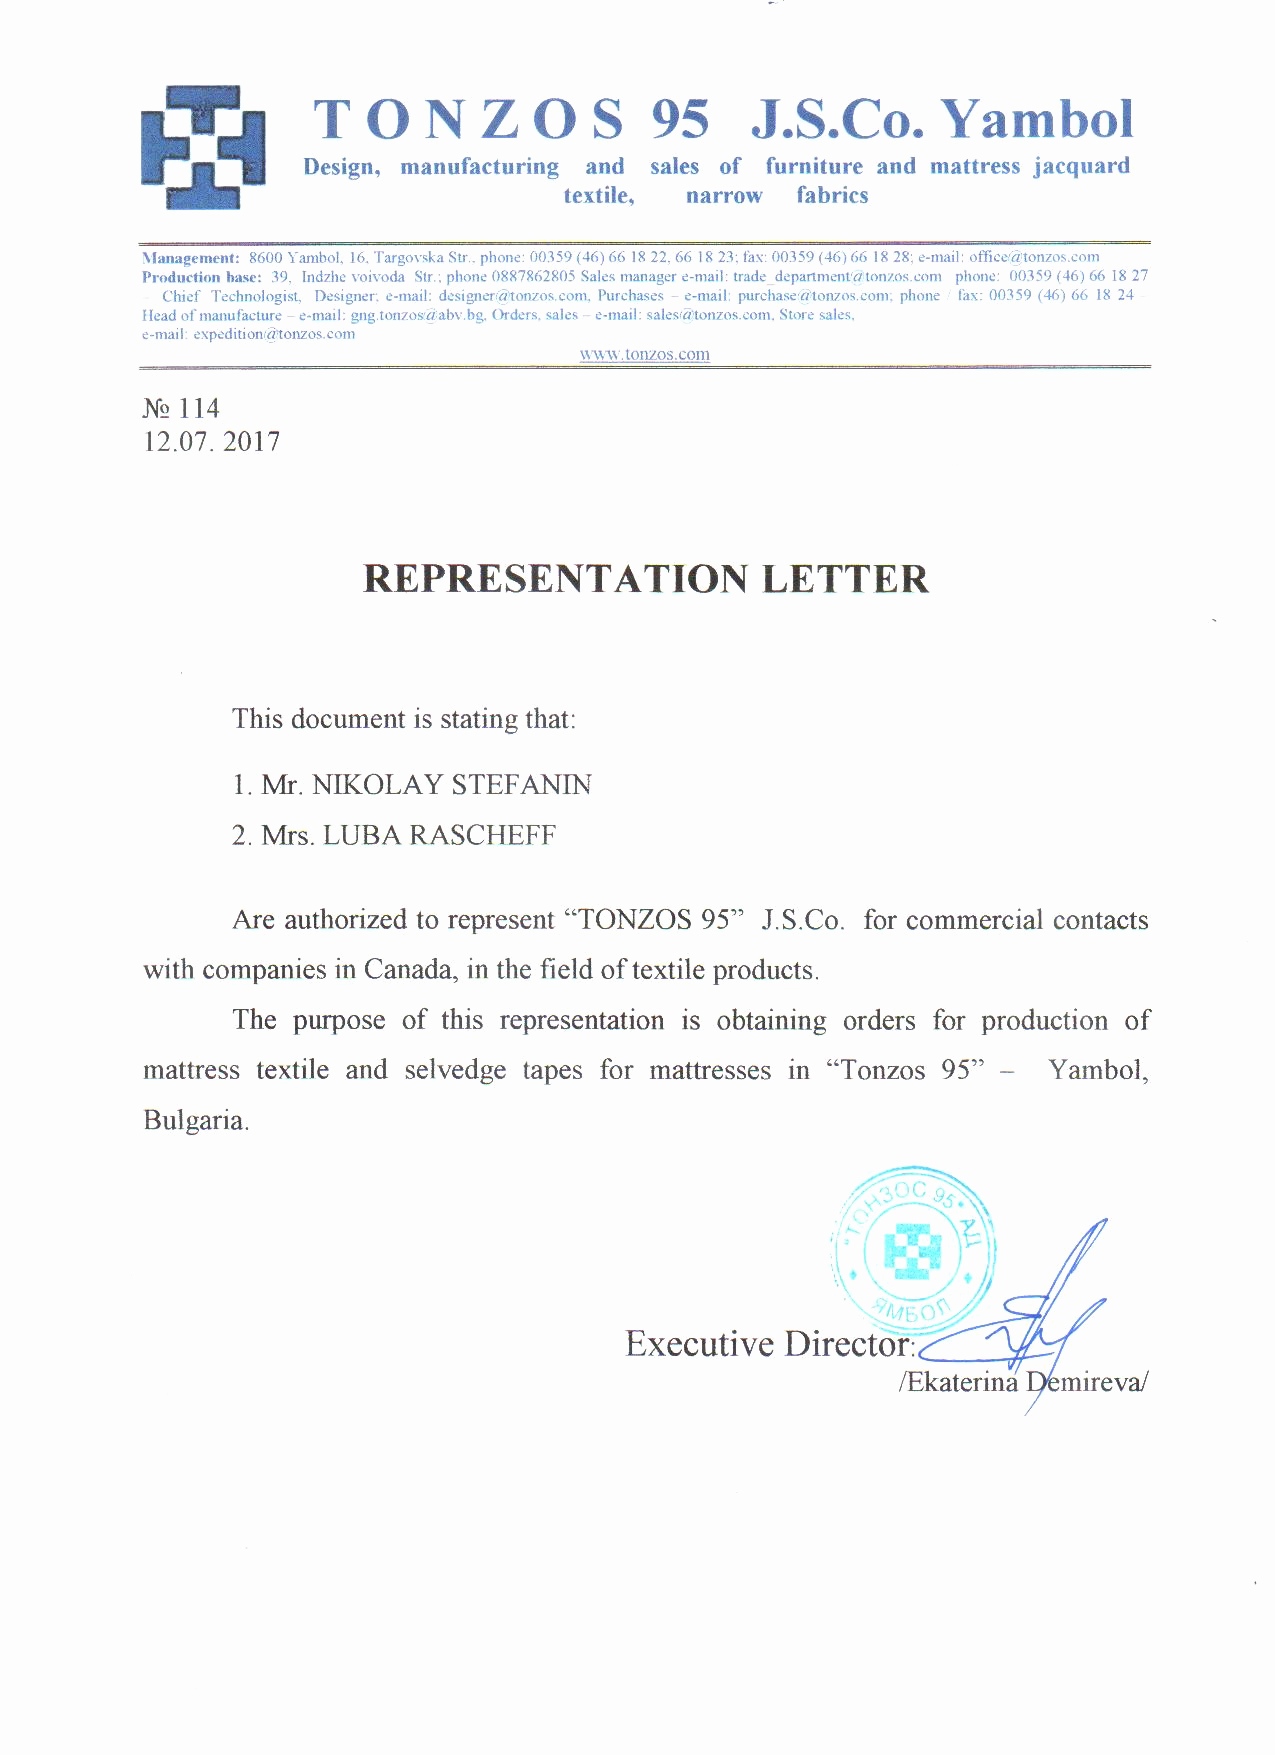 formal authorization letter to represent example